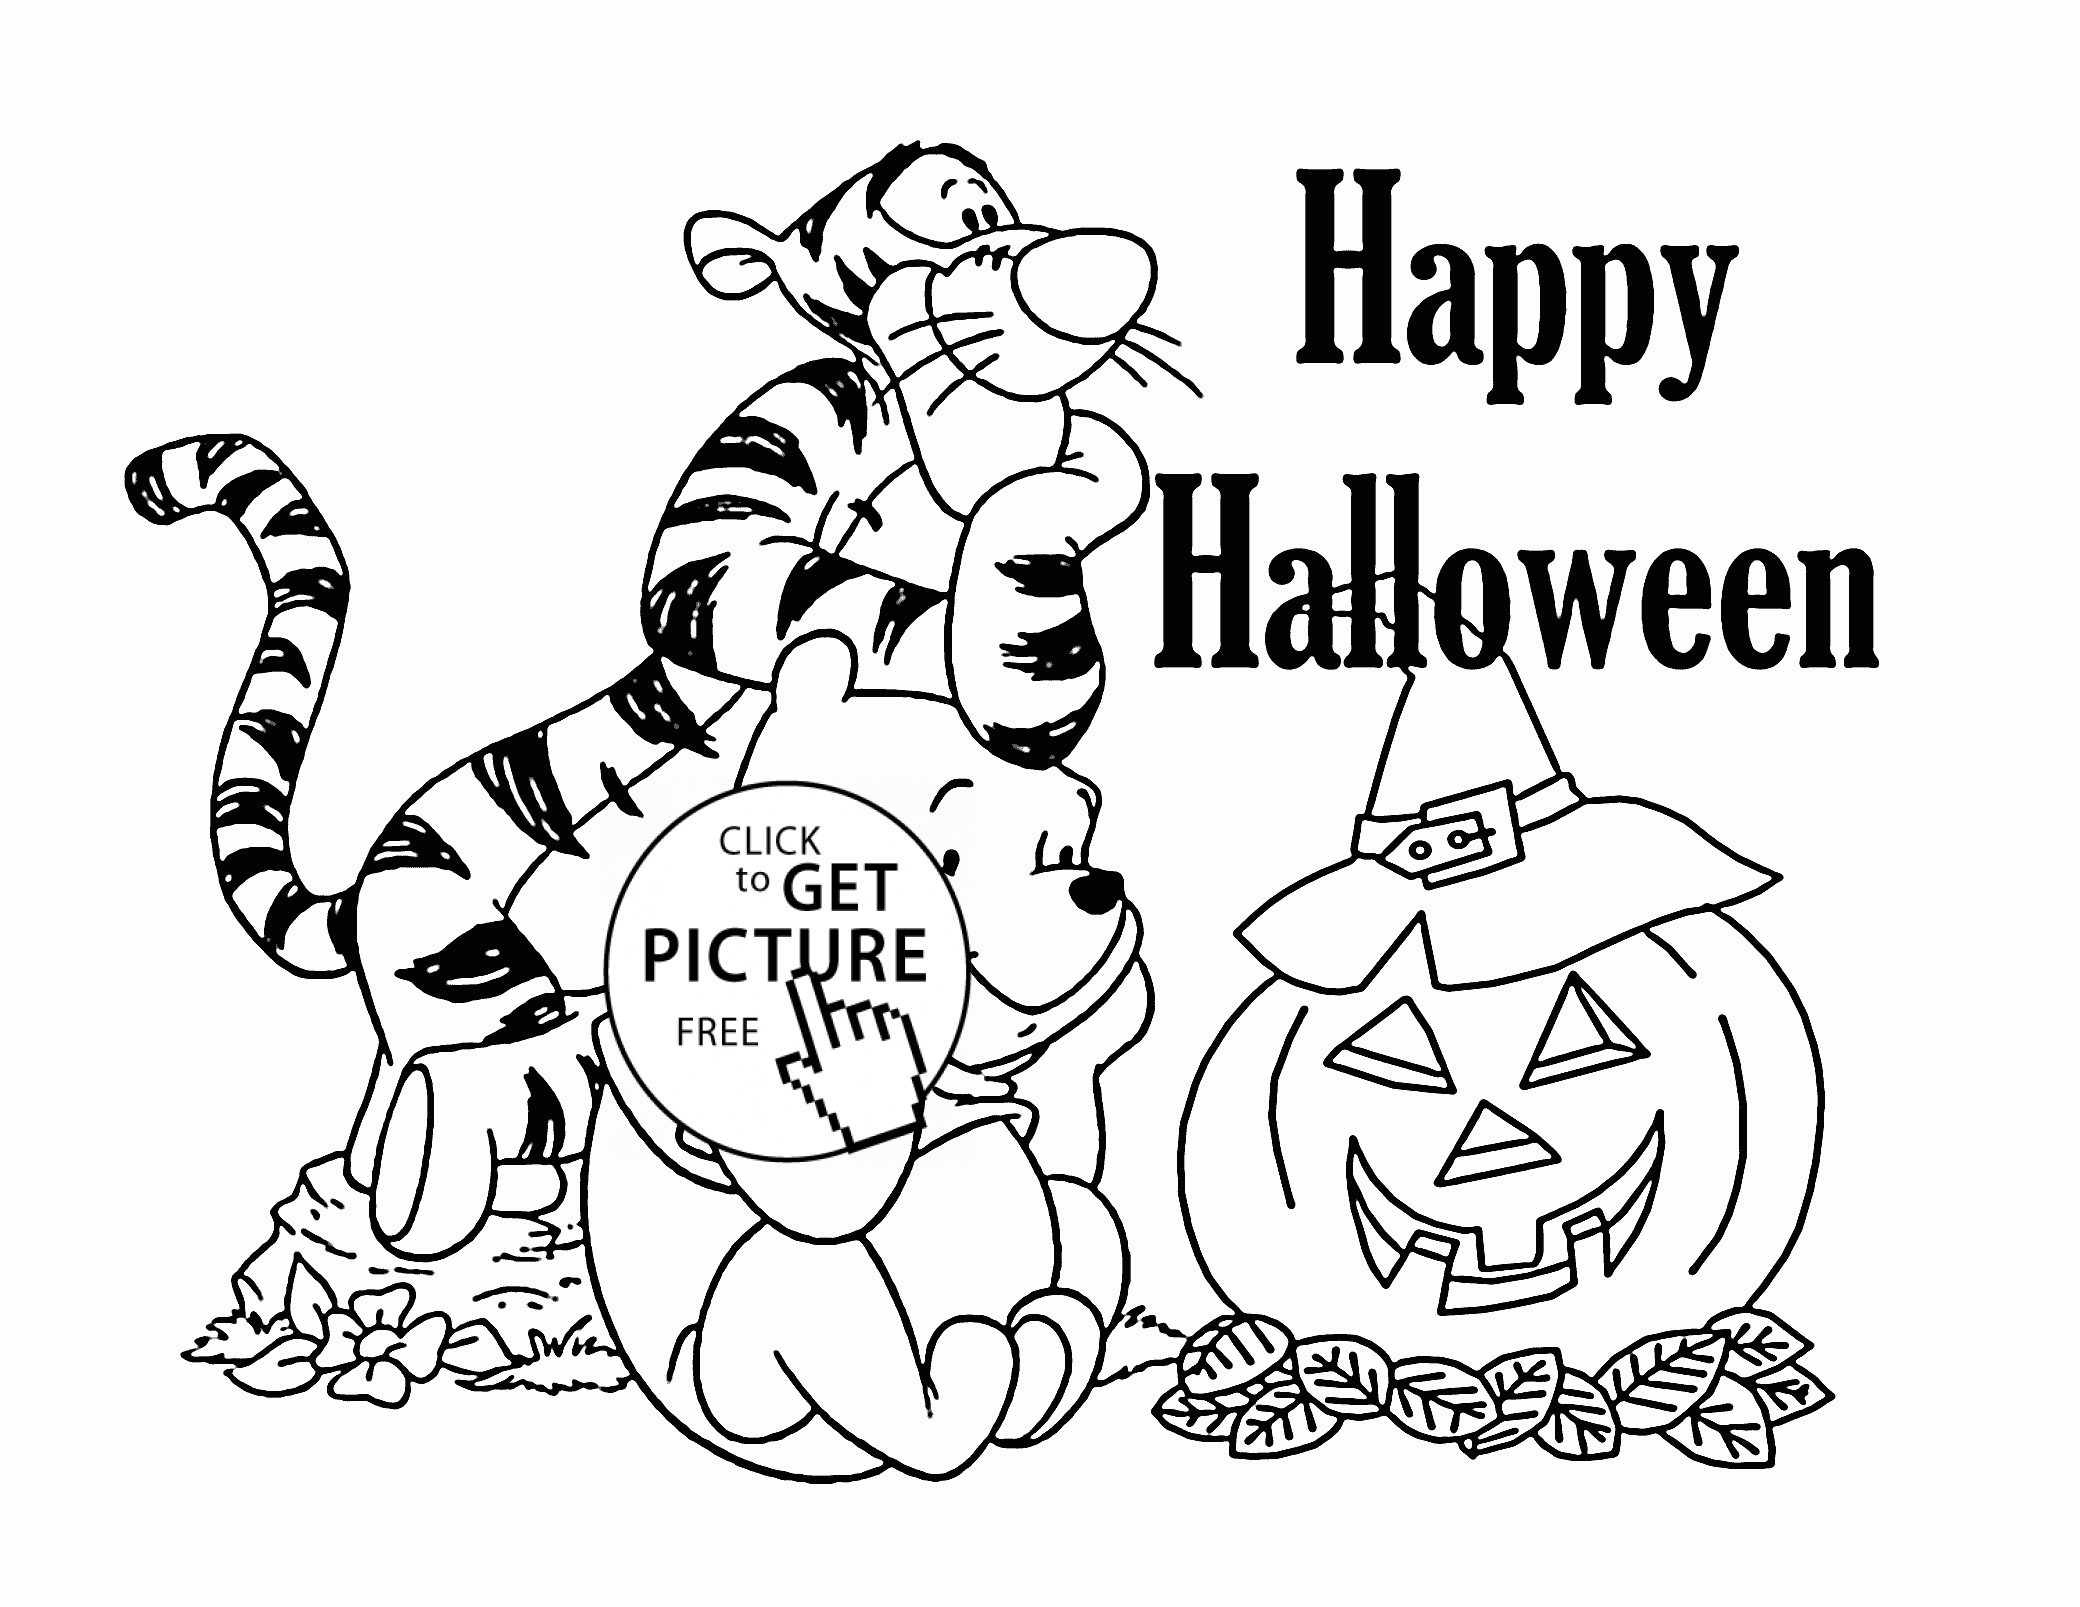 Halloween Coloring Pages Pdf
 Halloween Coloring Pages Printable Pdf Copy Winnie the